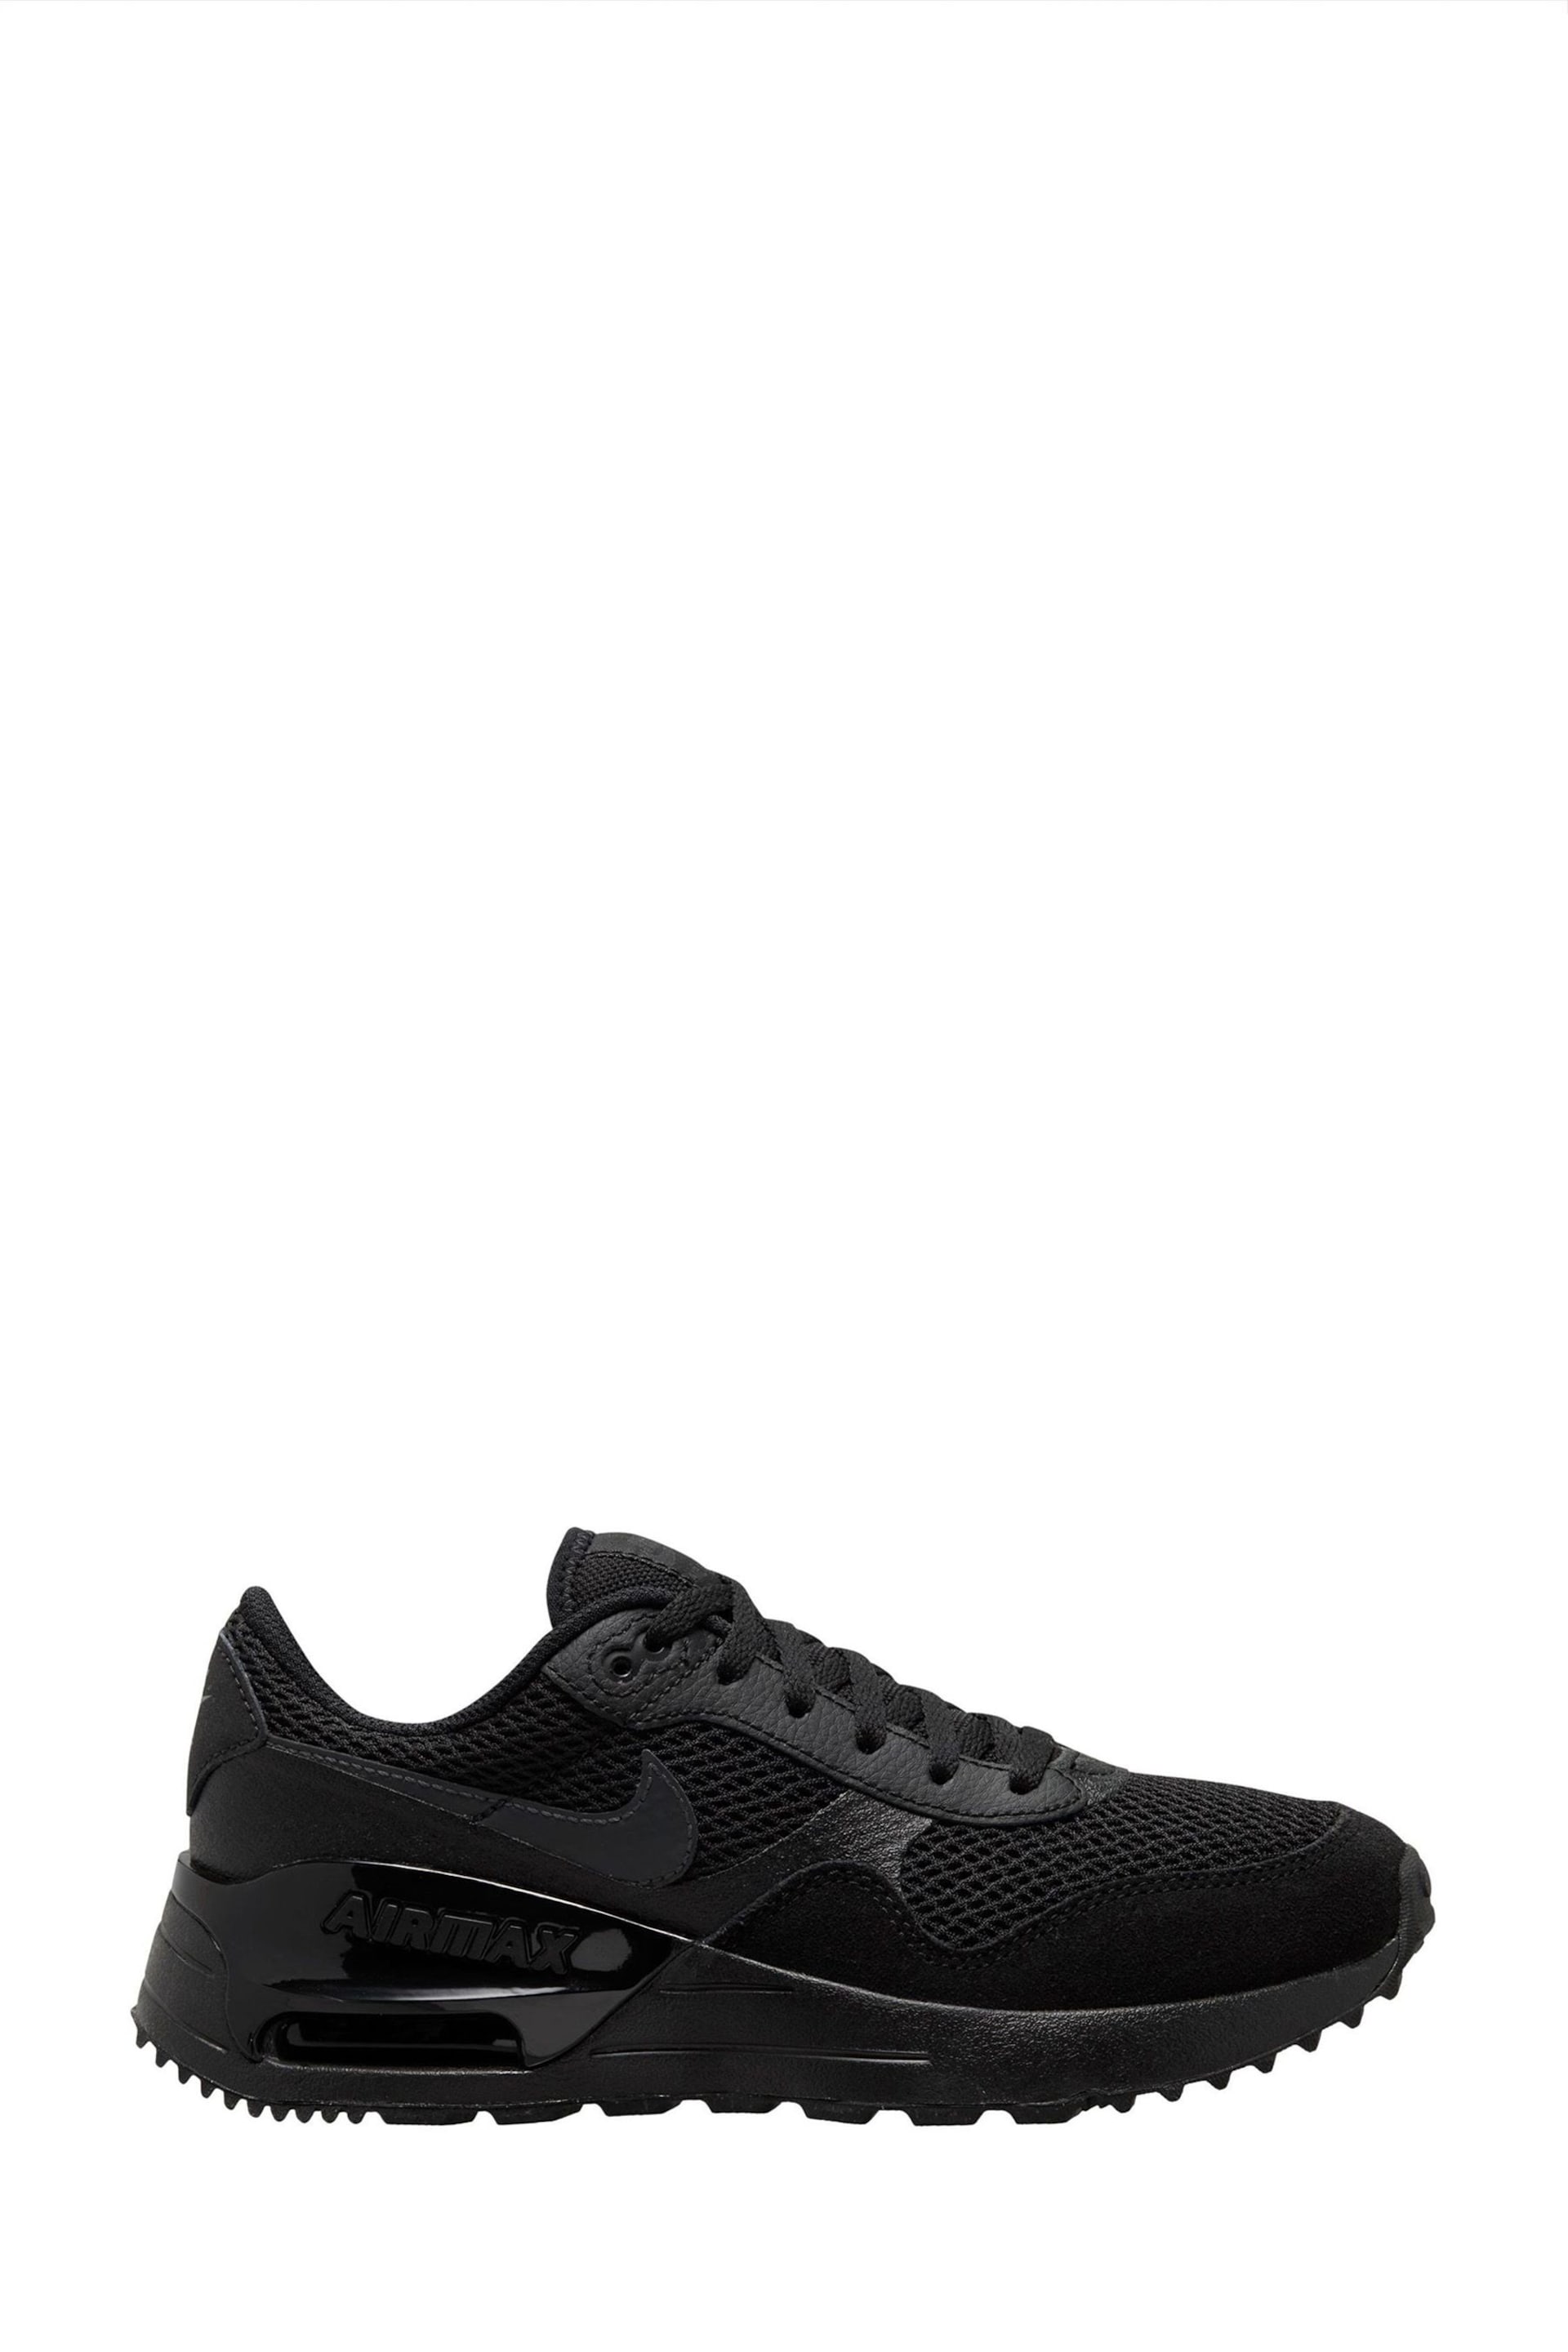 Nike Black Youth Air Max SYSTM Trainers - Image 1 of 4